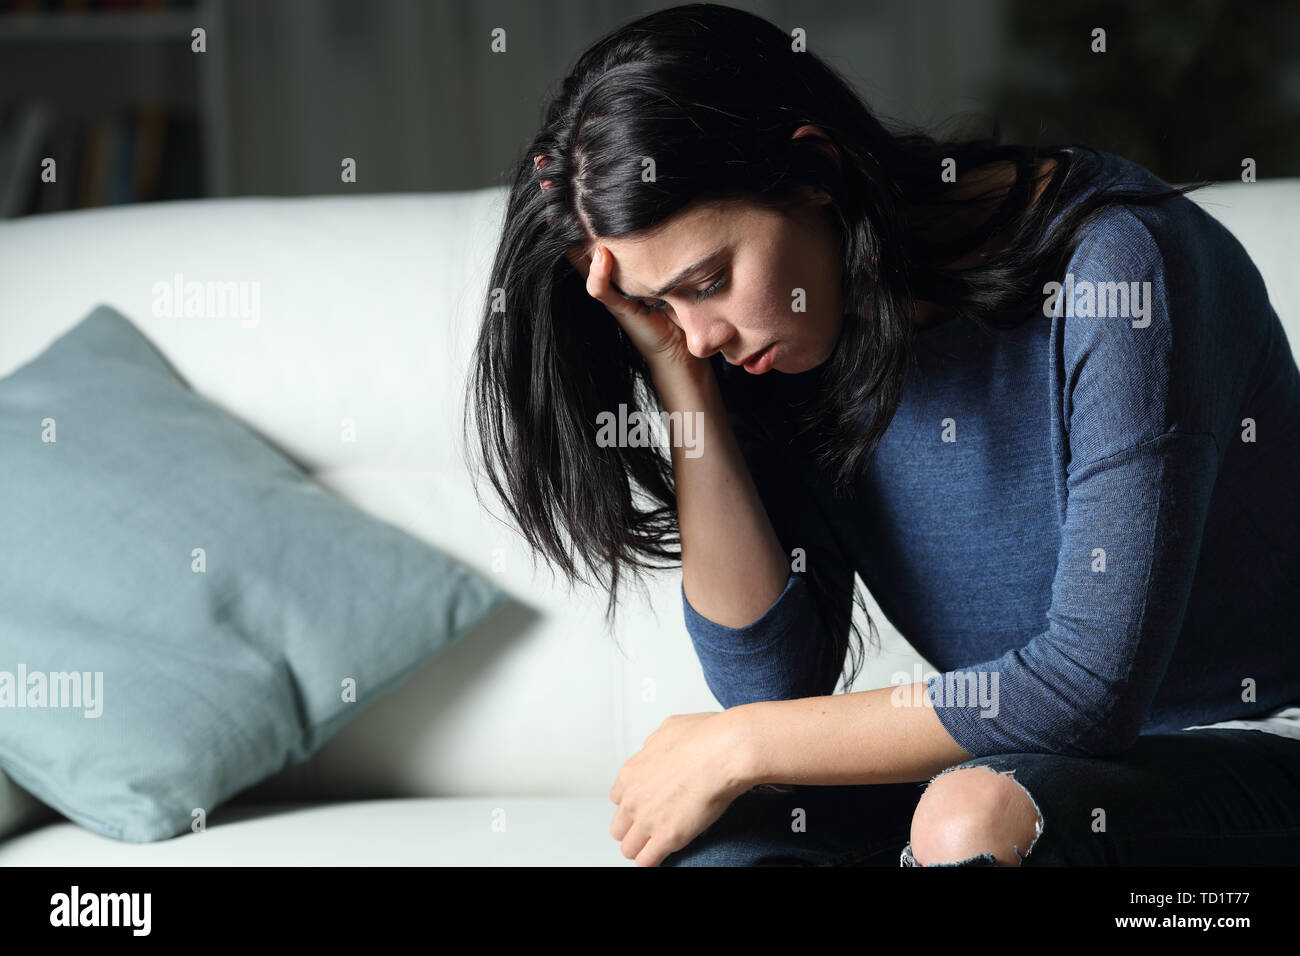 Sad Woman Complaining Alone Sitting On A Couch In The Dark Night